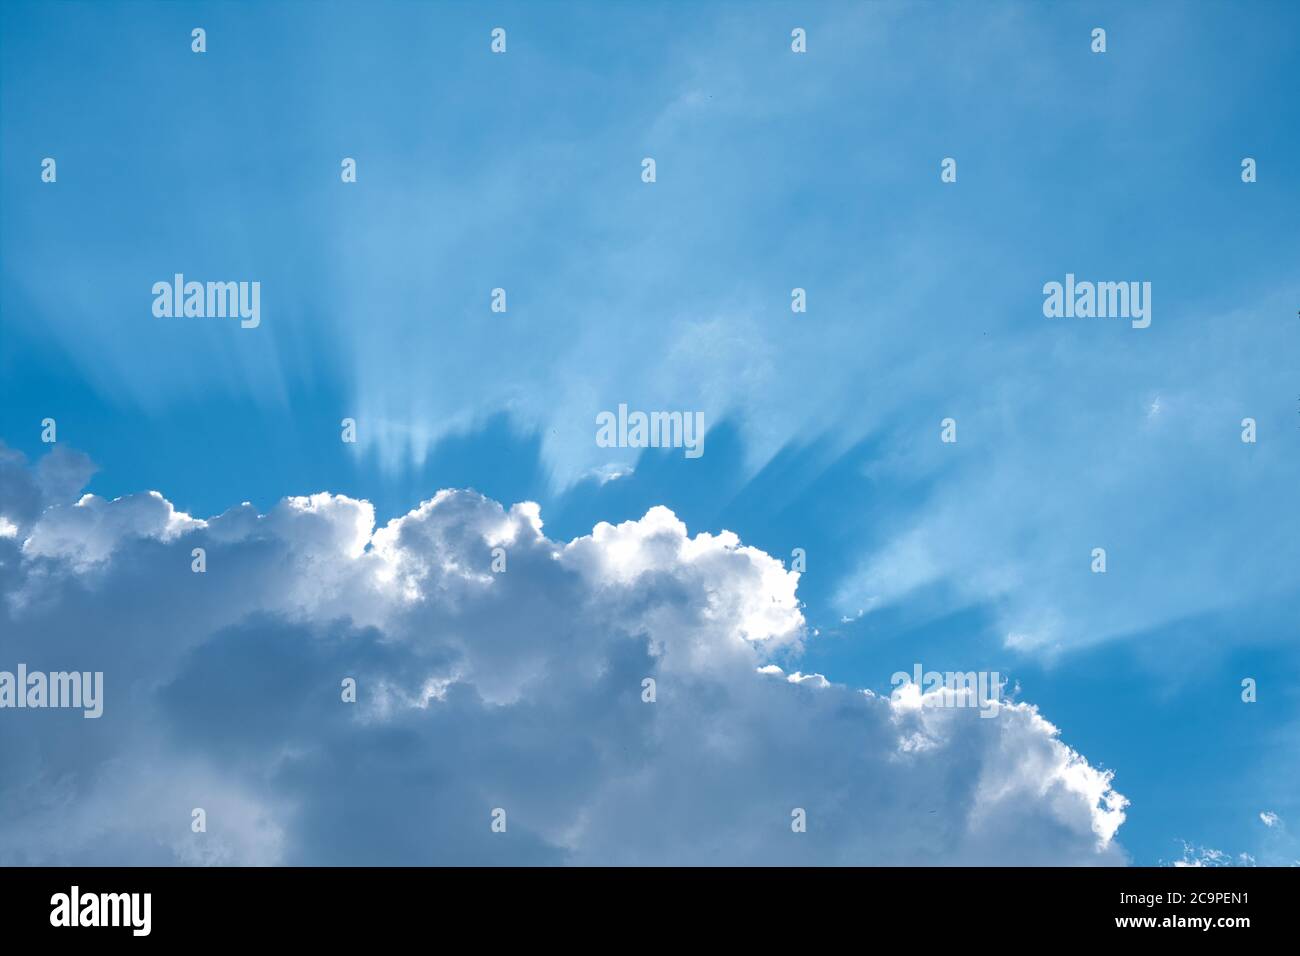 Sun behind a white cloud. Blue summer sky in the background. Corona of sunrays. Stock Photo